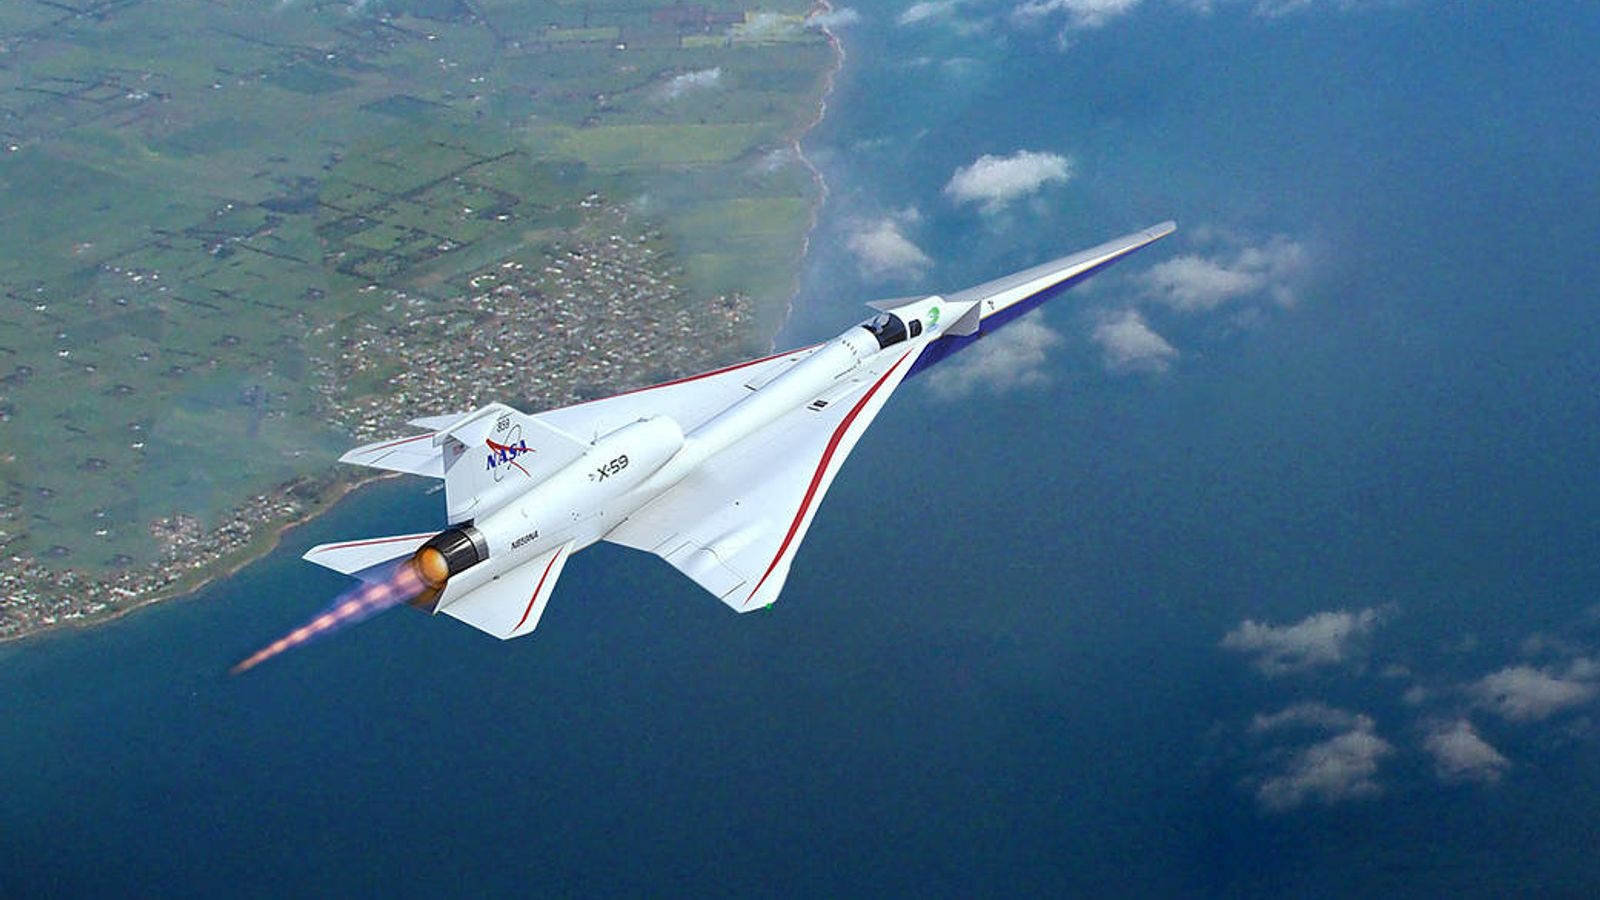 NASA is mulling over a potential supersonic passenger aircraft capable of traversing the Atlantic within a mere 90 minutes.